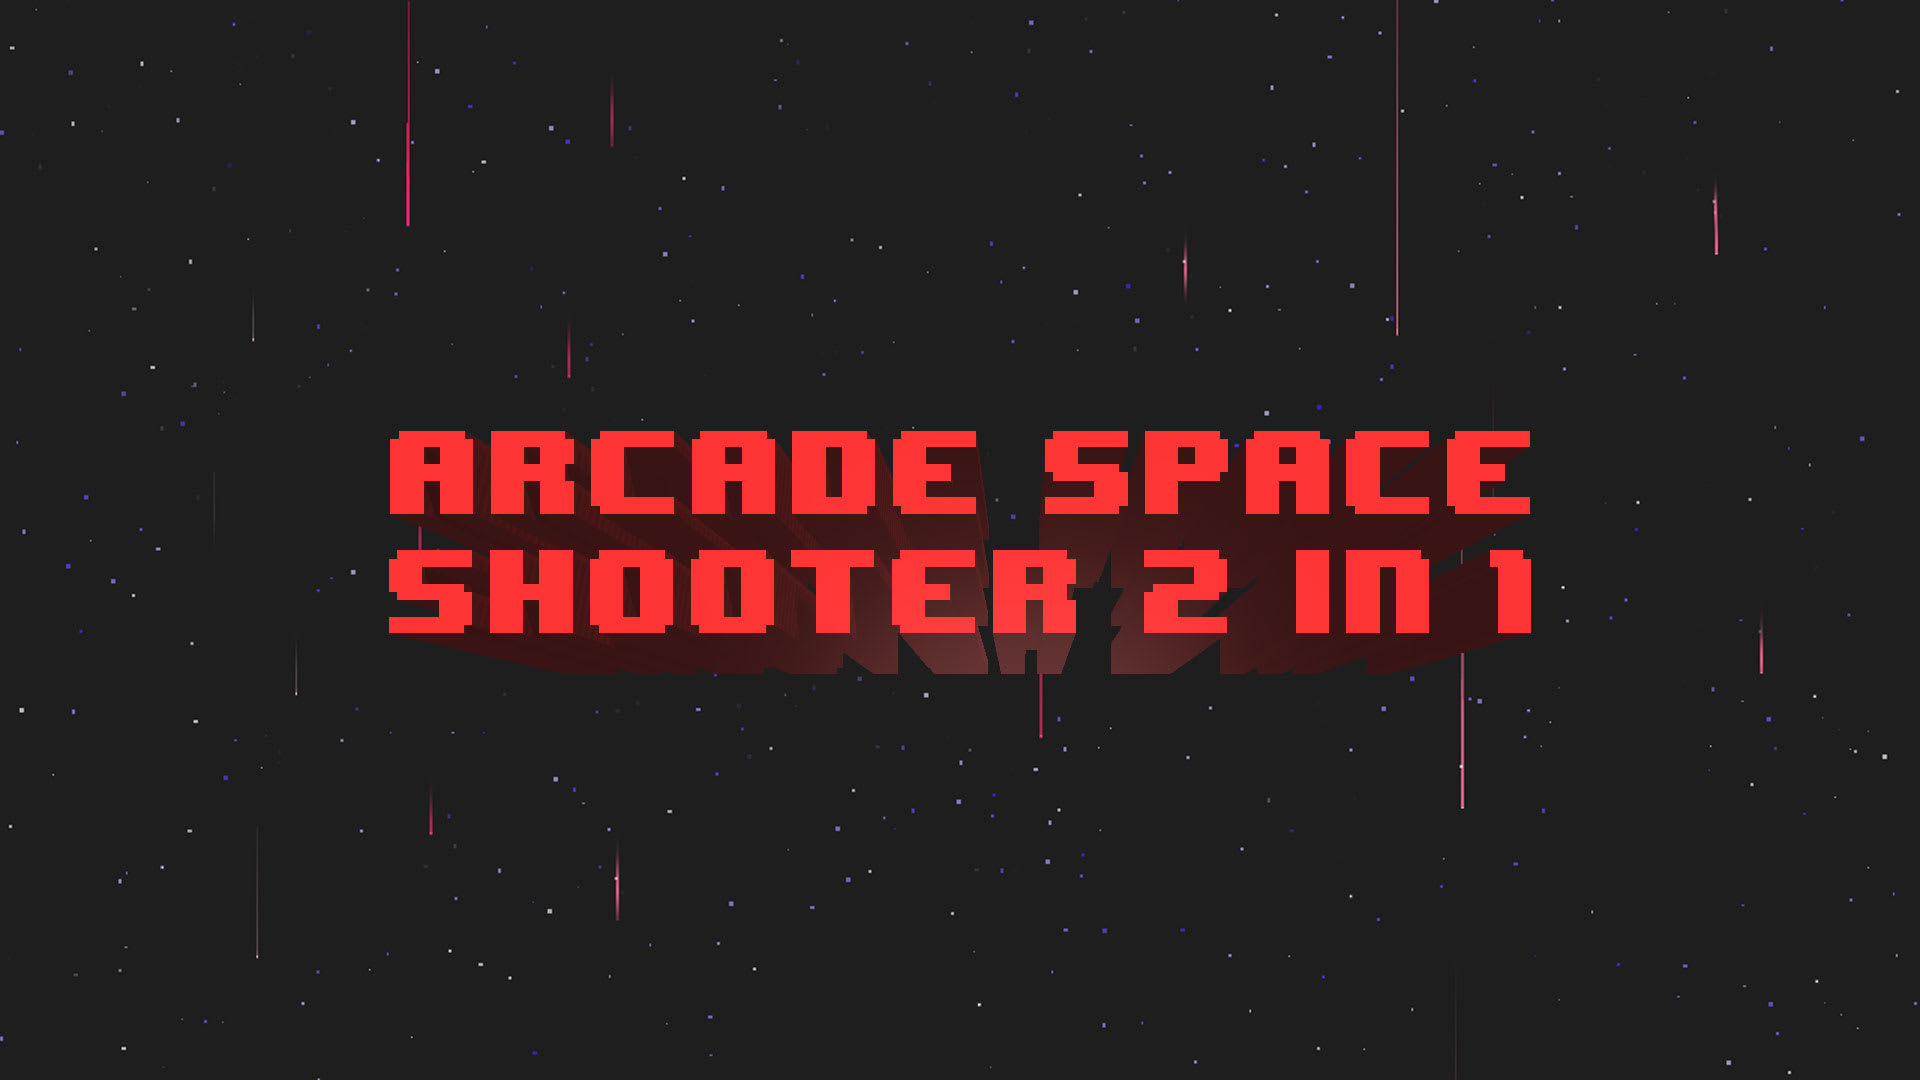 Arcade Space Shooter 2 in 1 1